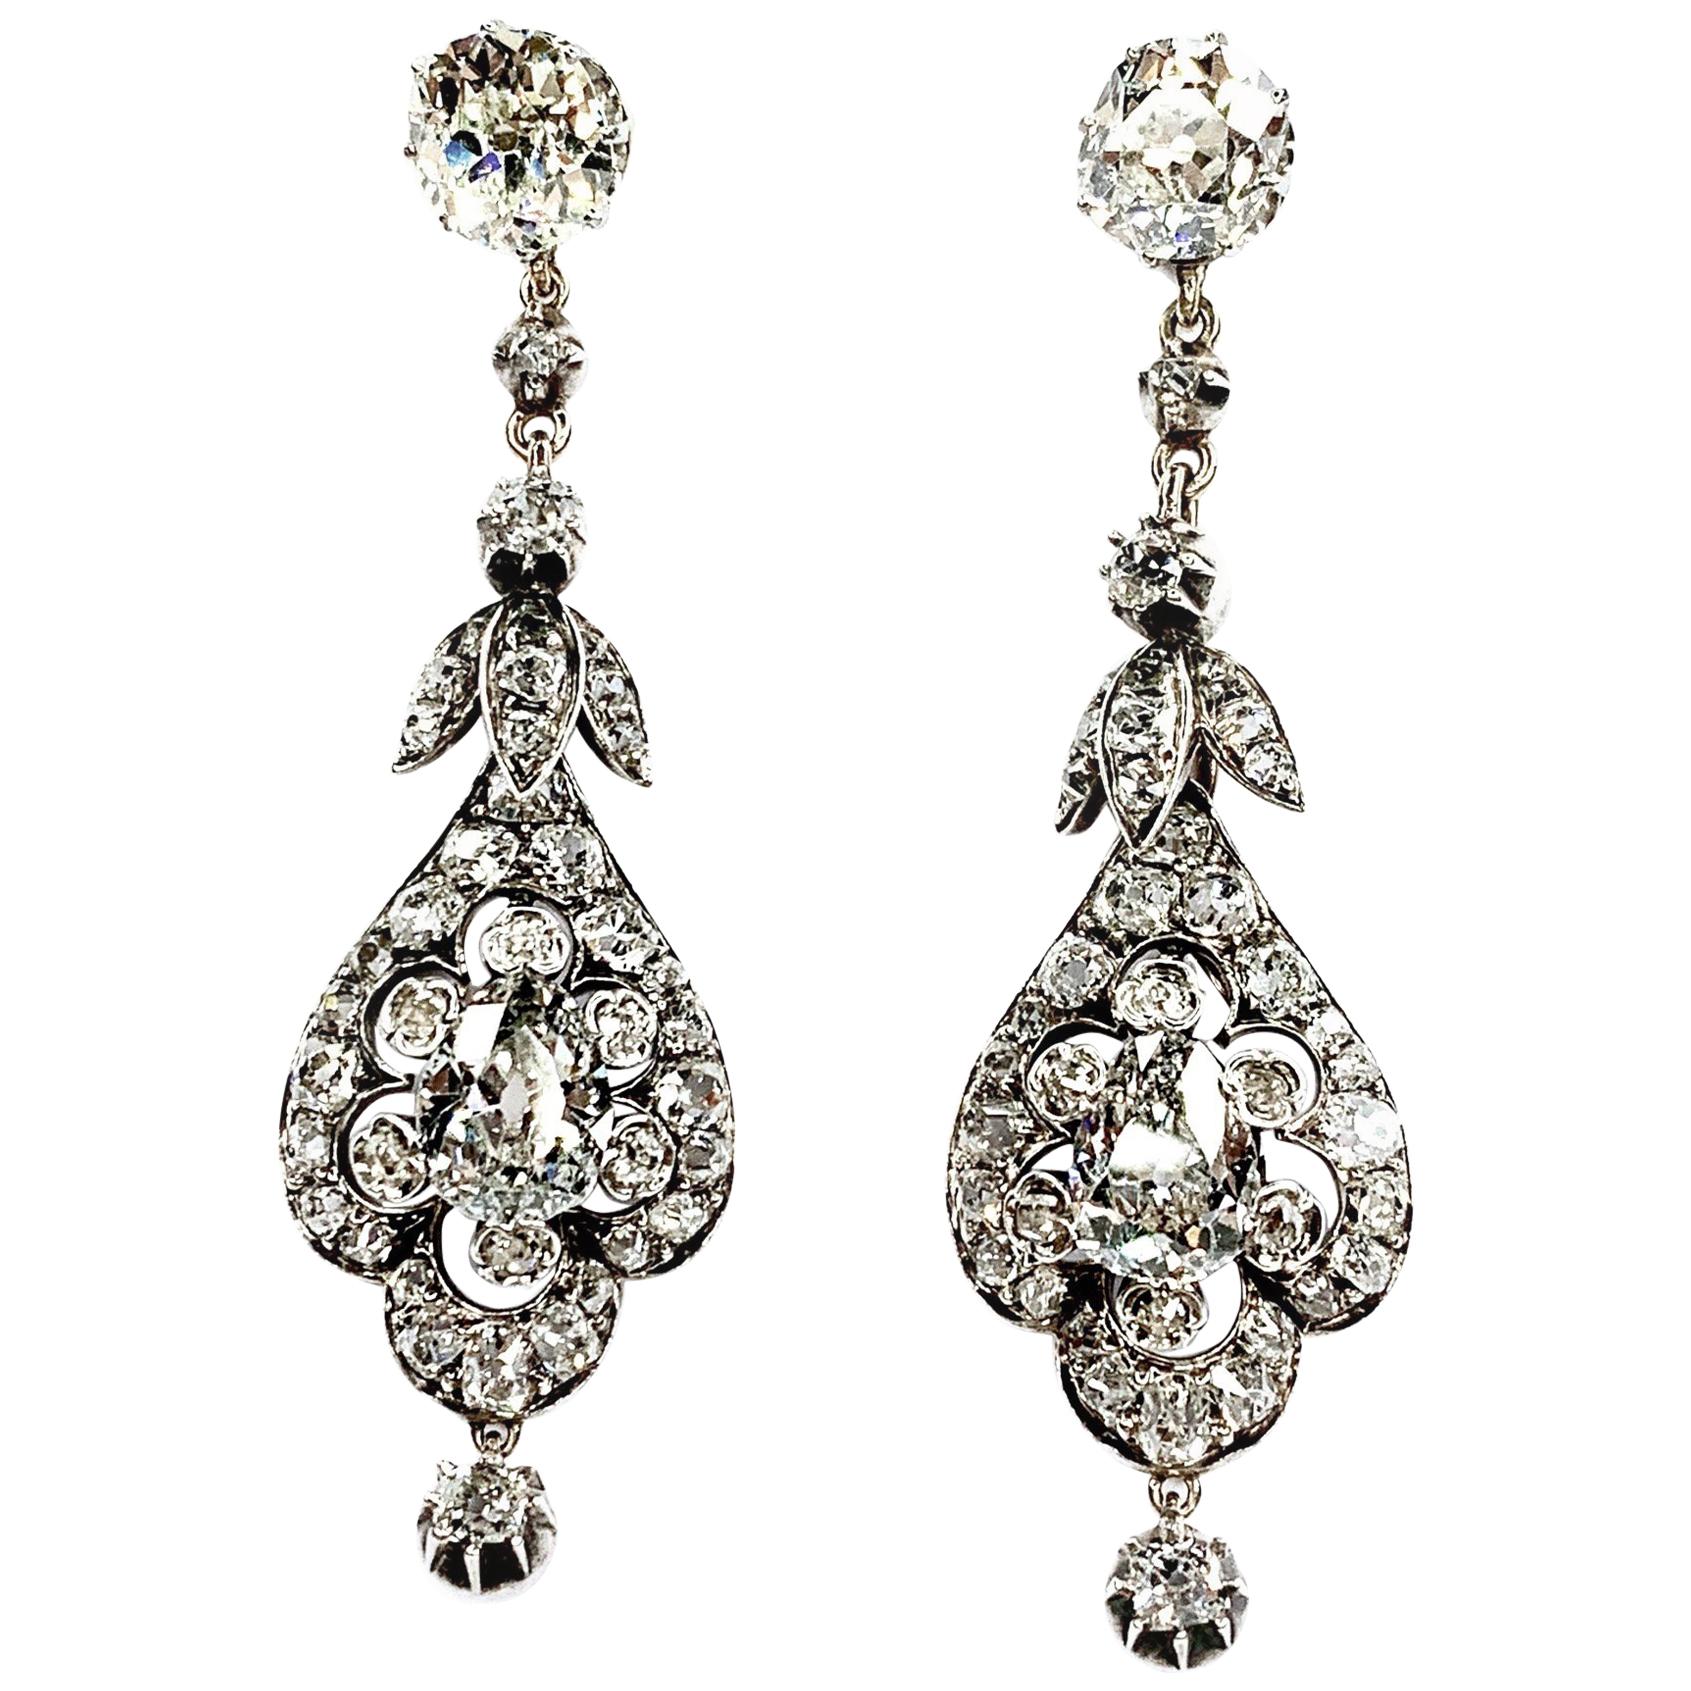 GEMOLITHOS Antique Pair of Diamond Earrings, Formerly from a Princely Family